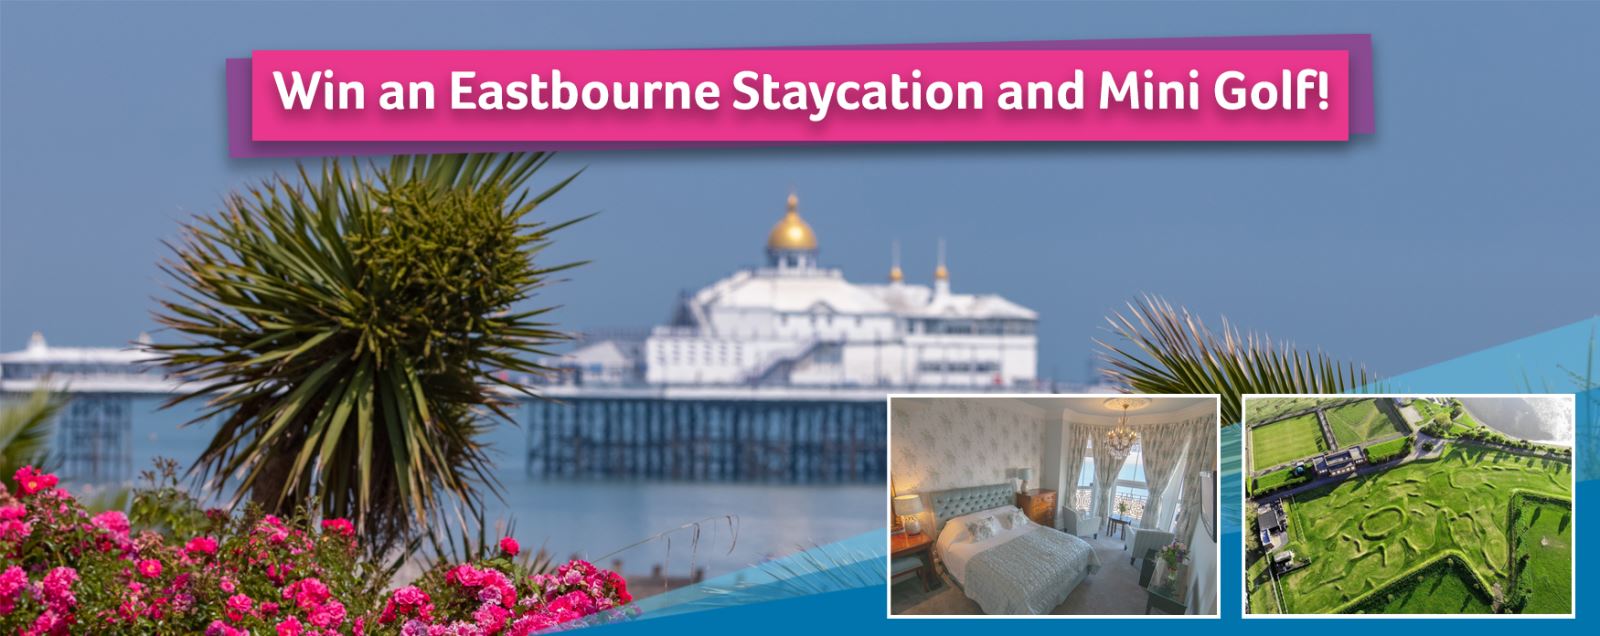 Win an Eastbourne staycation and mini golf